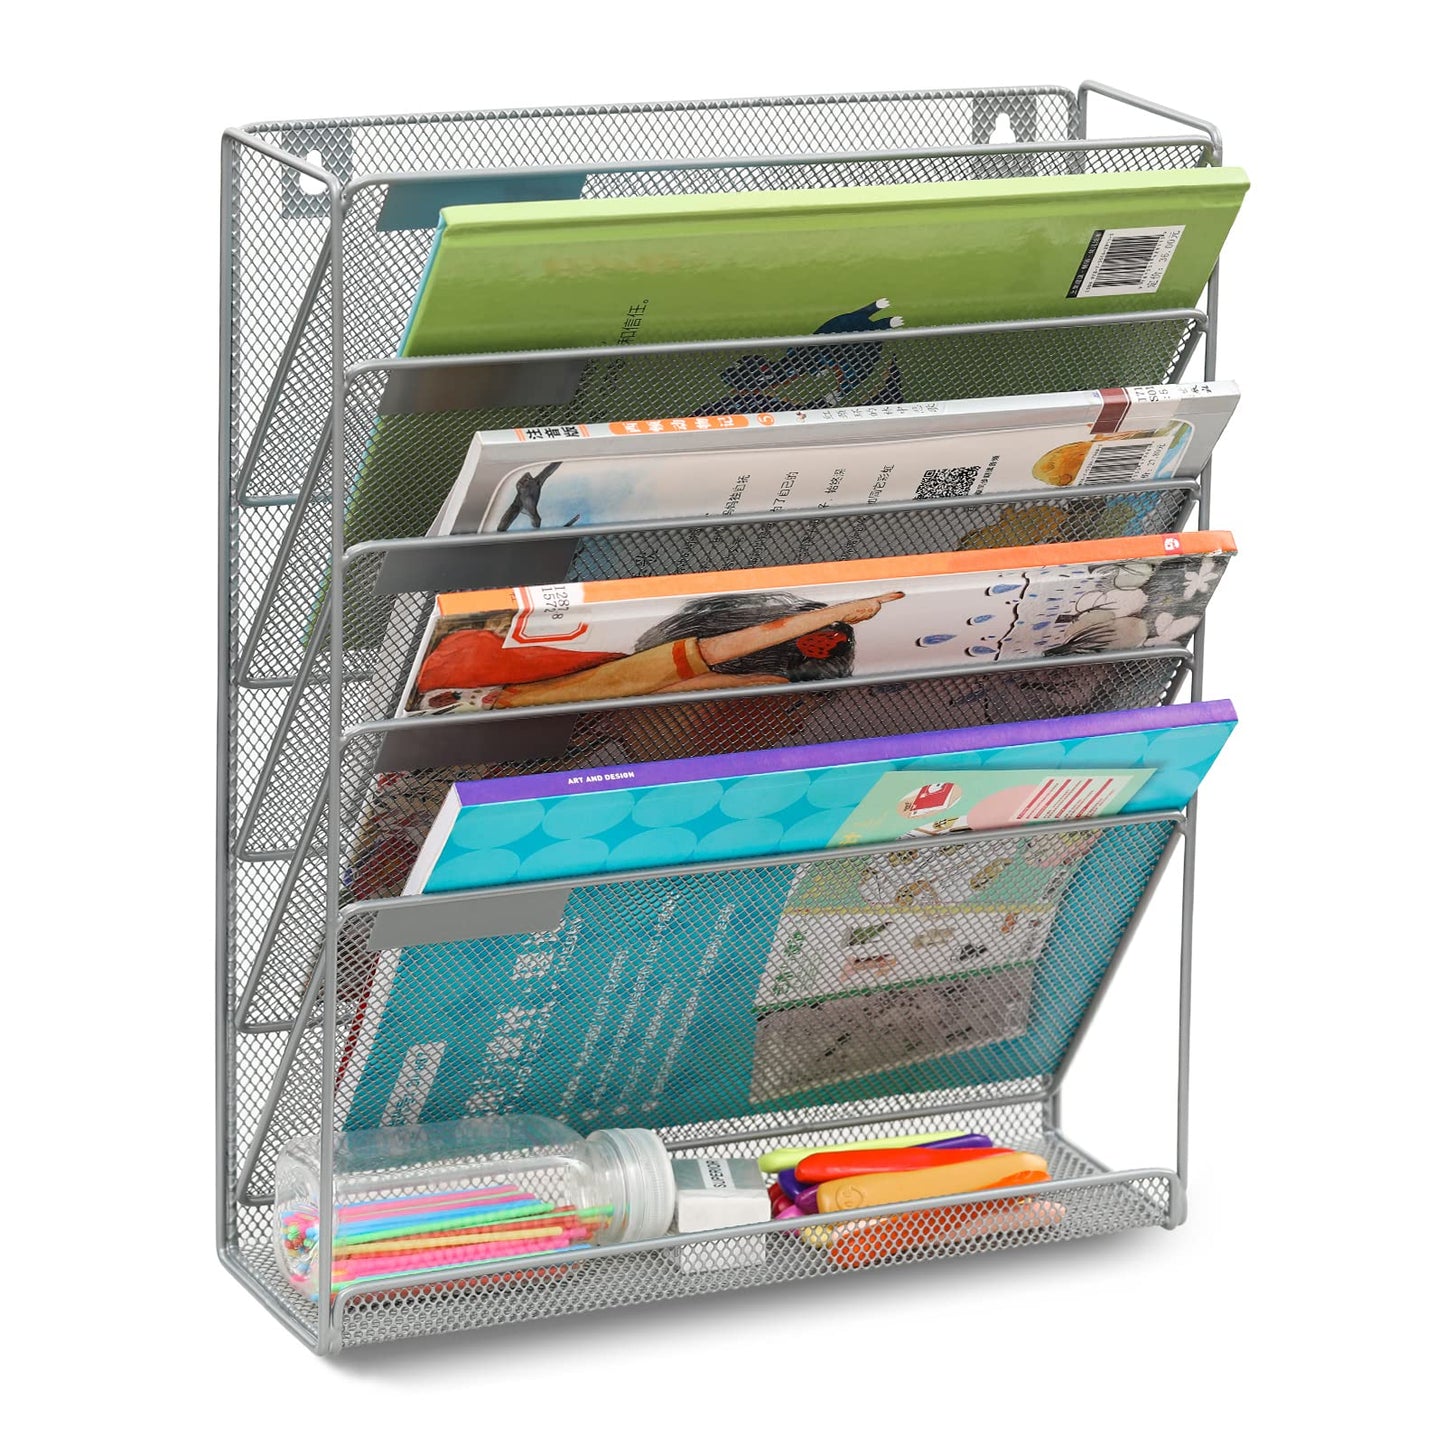 Superbpag Hanging File Organizer, 5 Tier Wall Mount Document Letter Tray Organizer, Silver